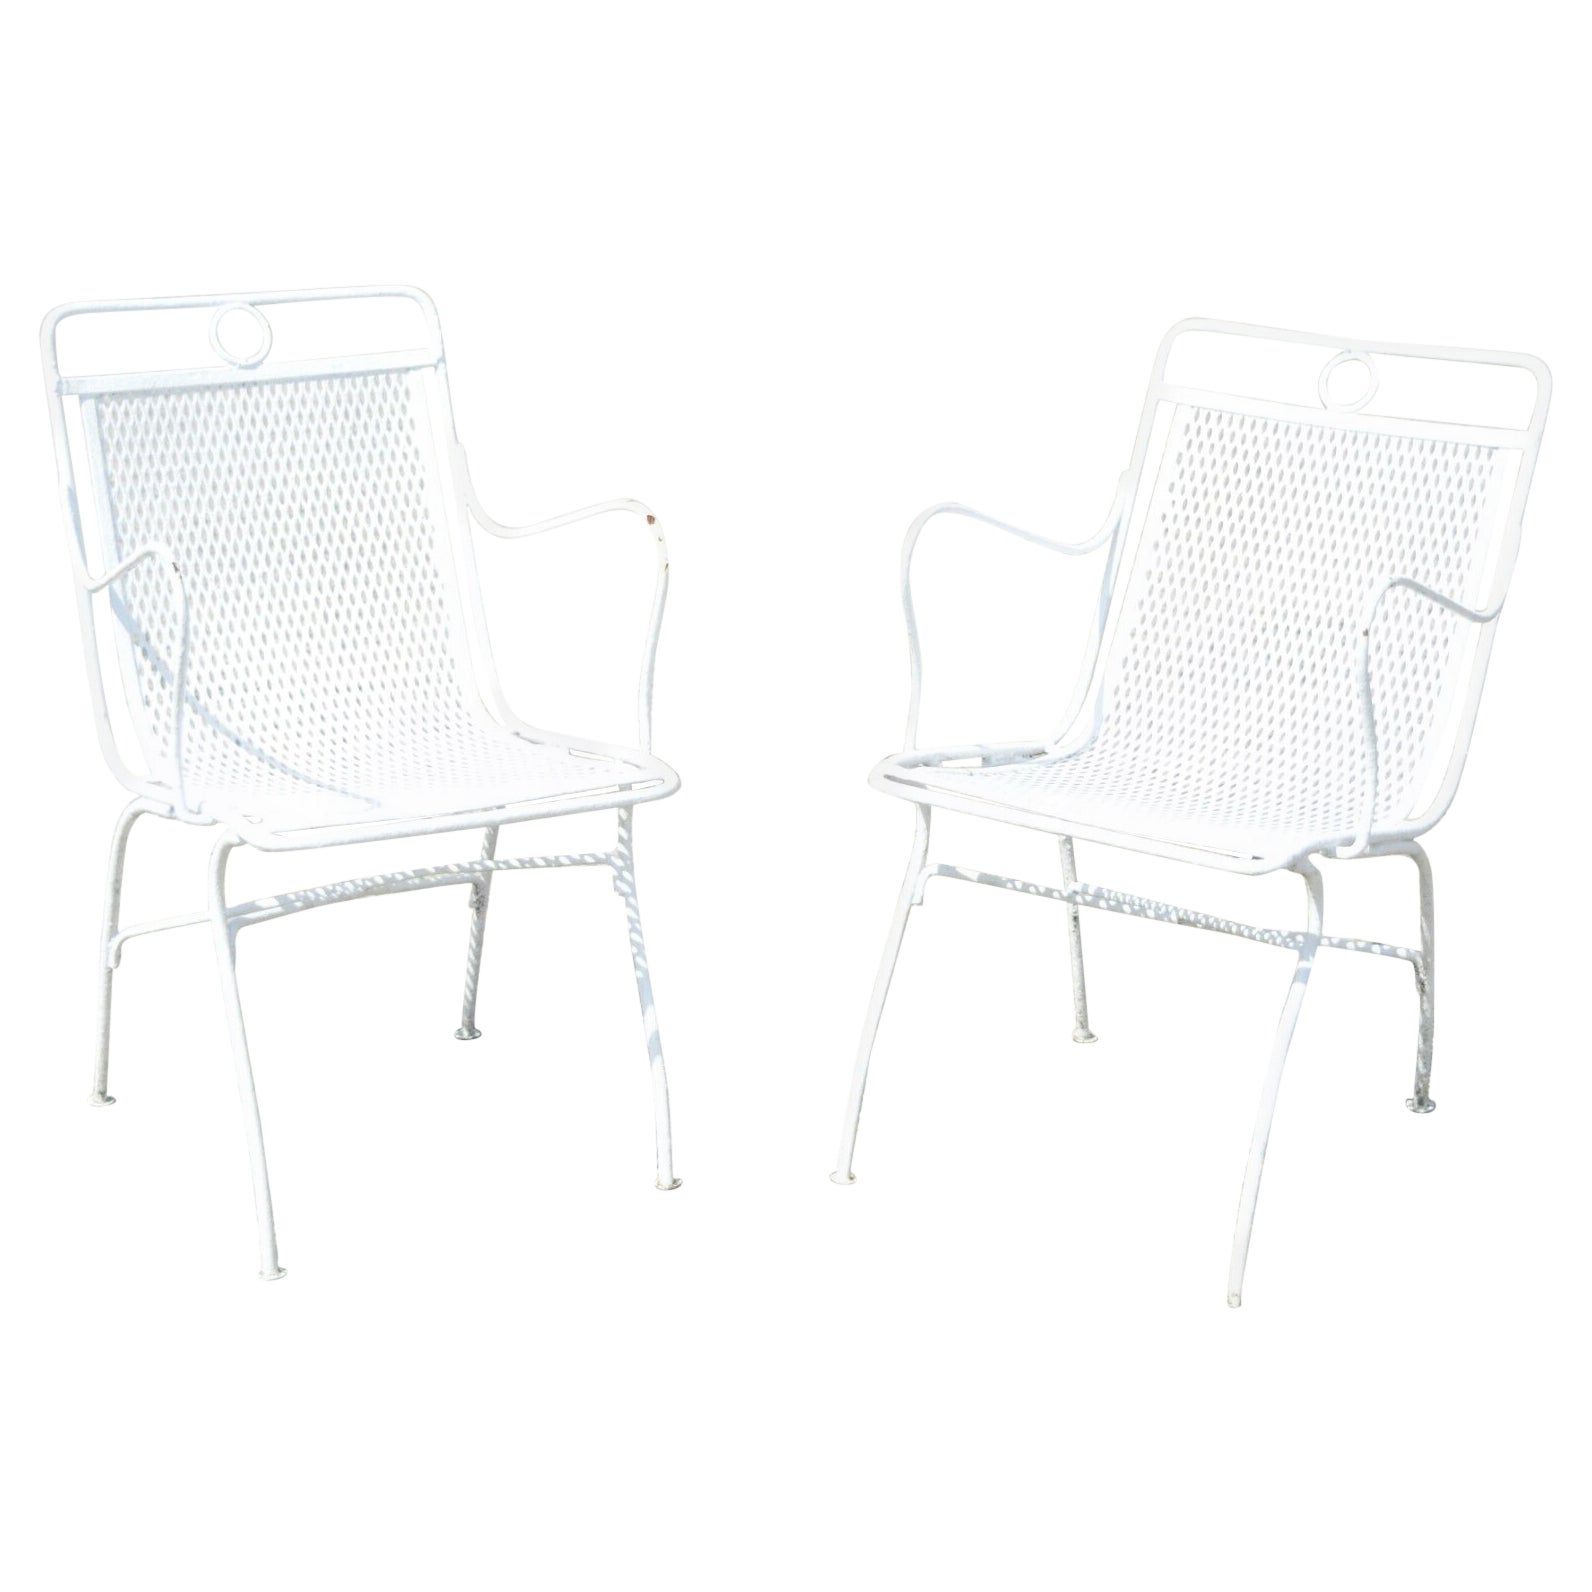 Vintage Russell Woodard Wrought Iron Outdoor Garden Patio Chairs, a Pair For Sale